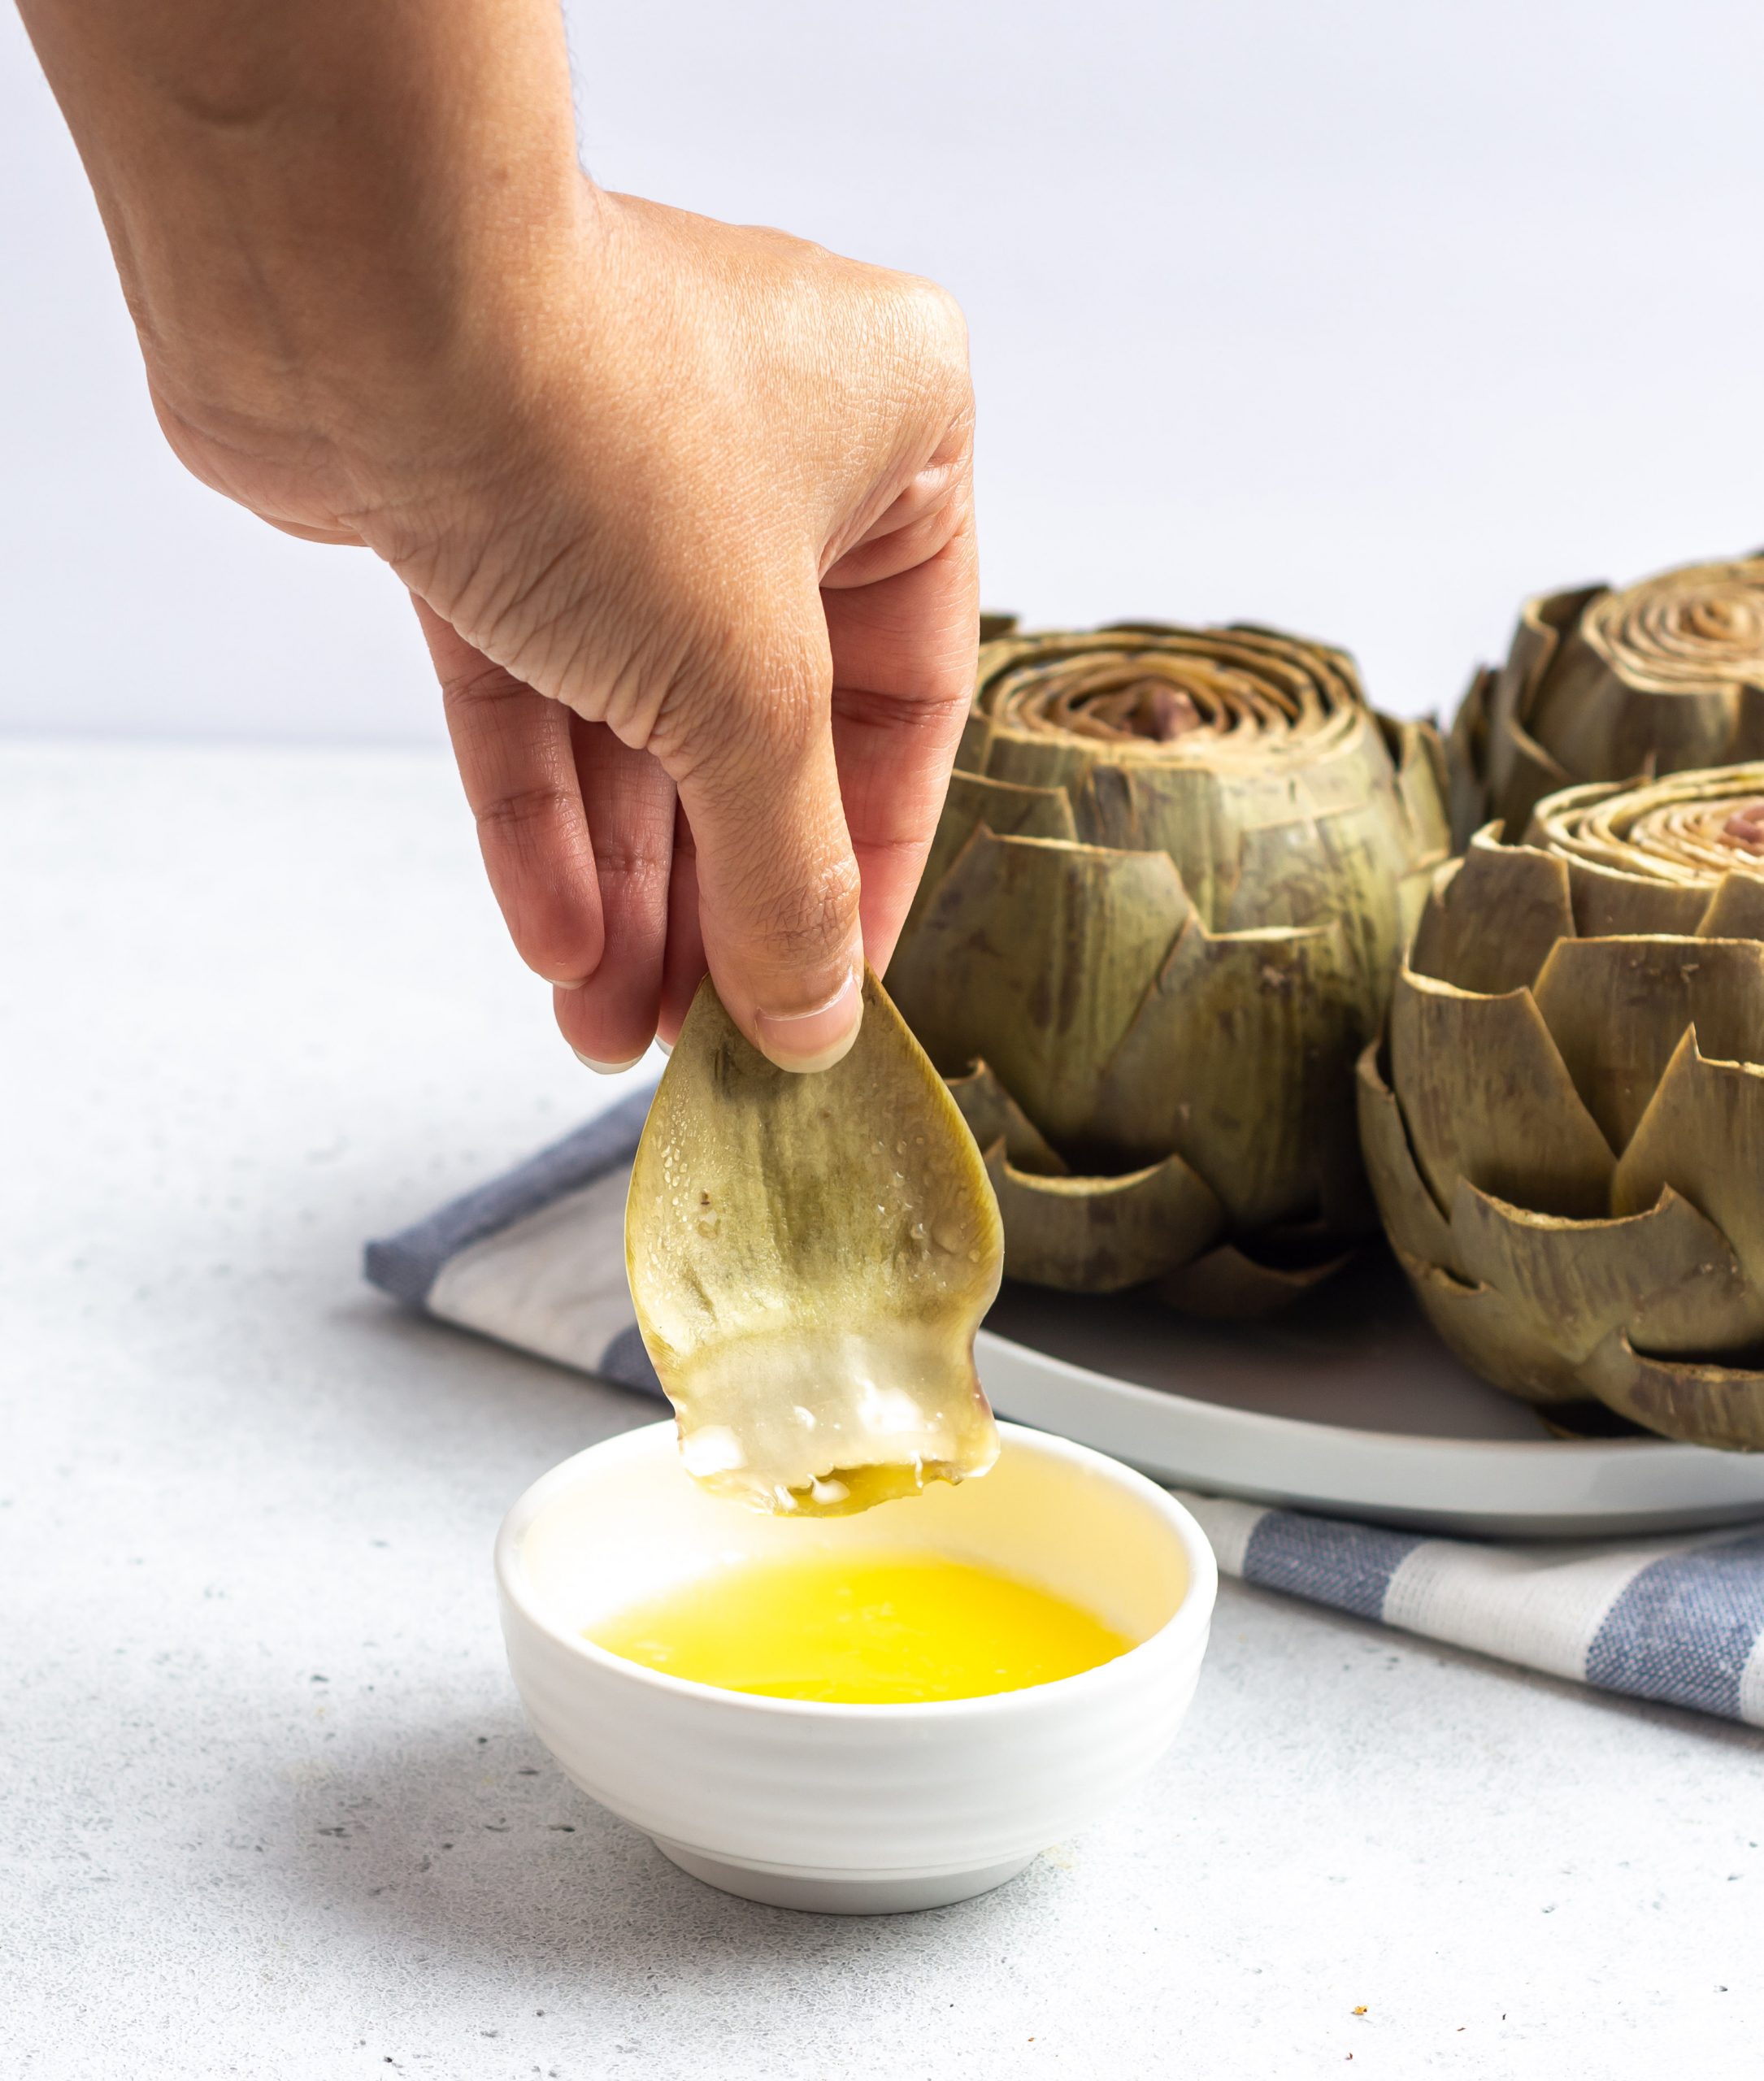 Are you sick of your stovetop taking forever to cook artichokes? Make instant pot artichokes in a fraction of the time using this super simple recipe! Check it!